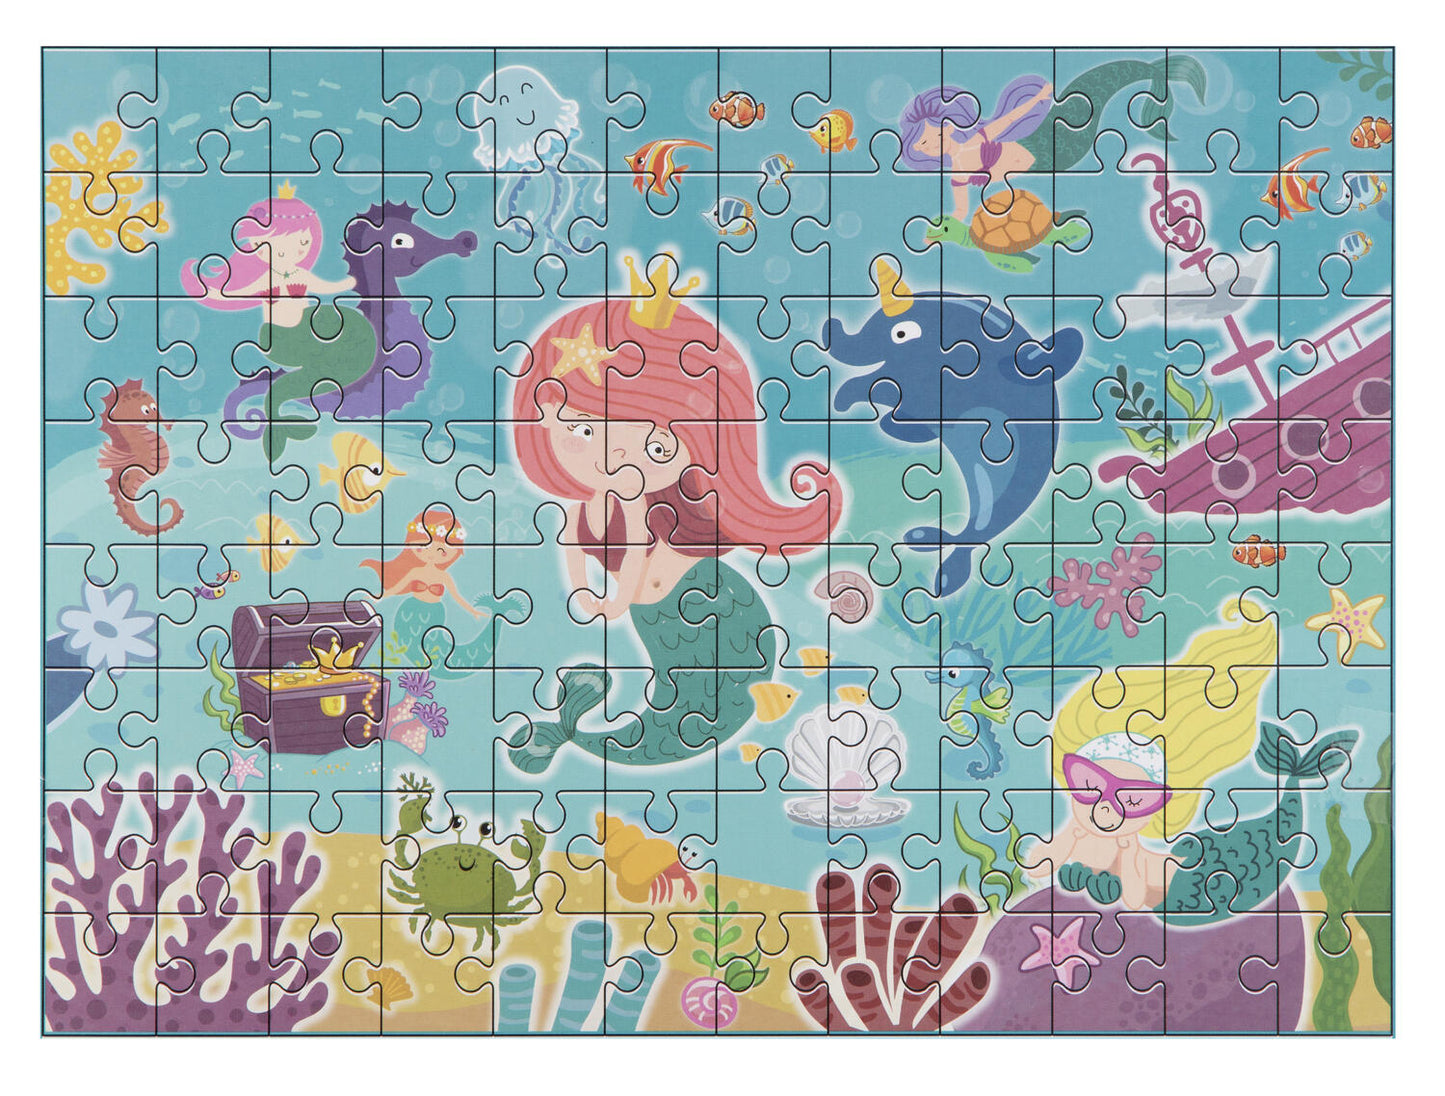 Puzzle - Sirene jucause (96 piese)